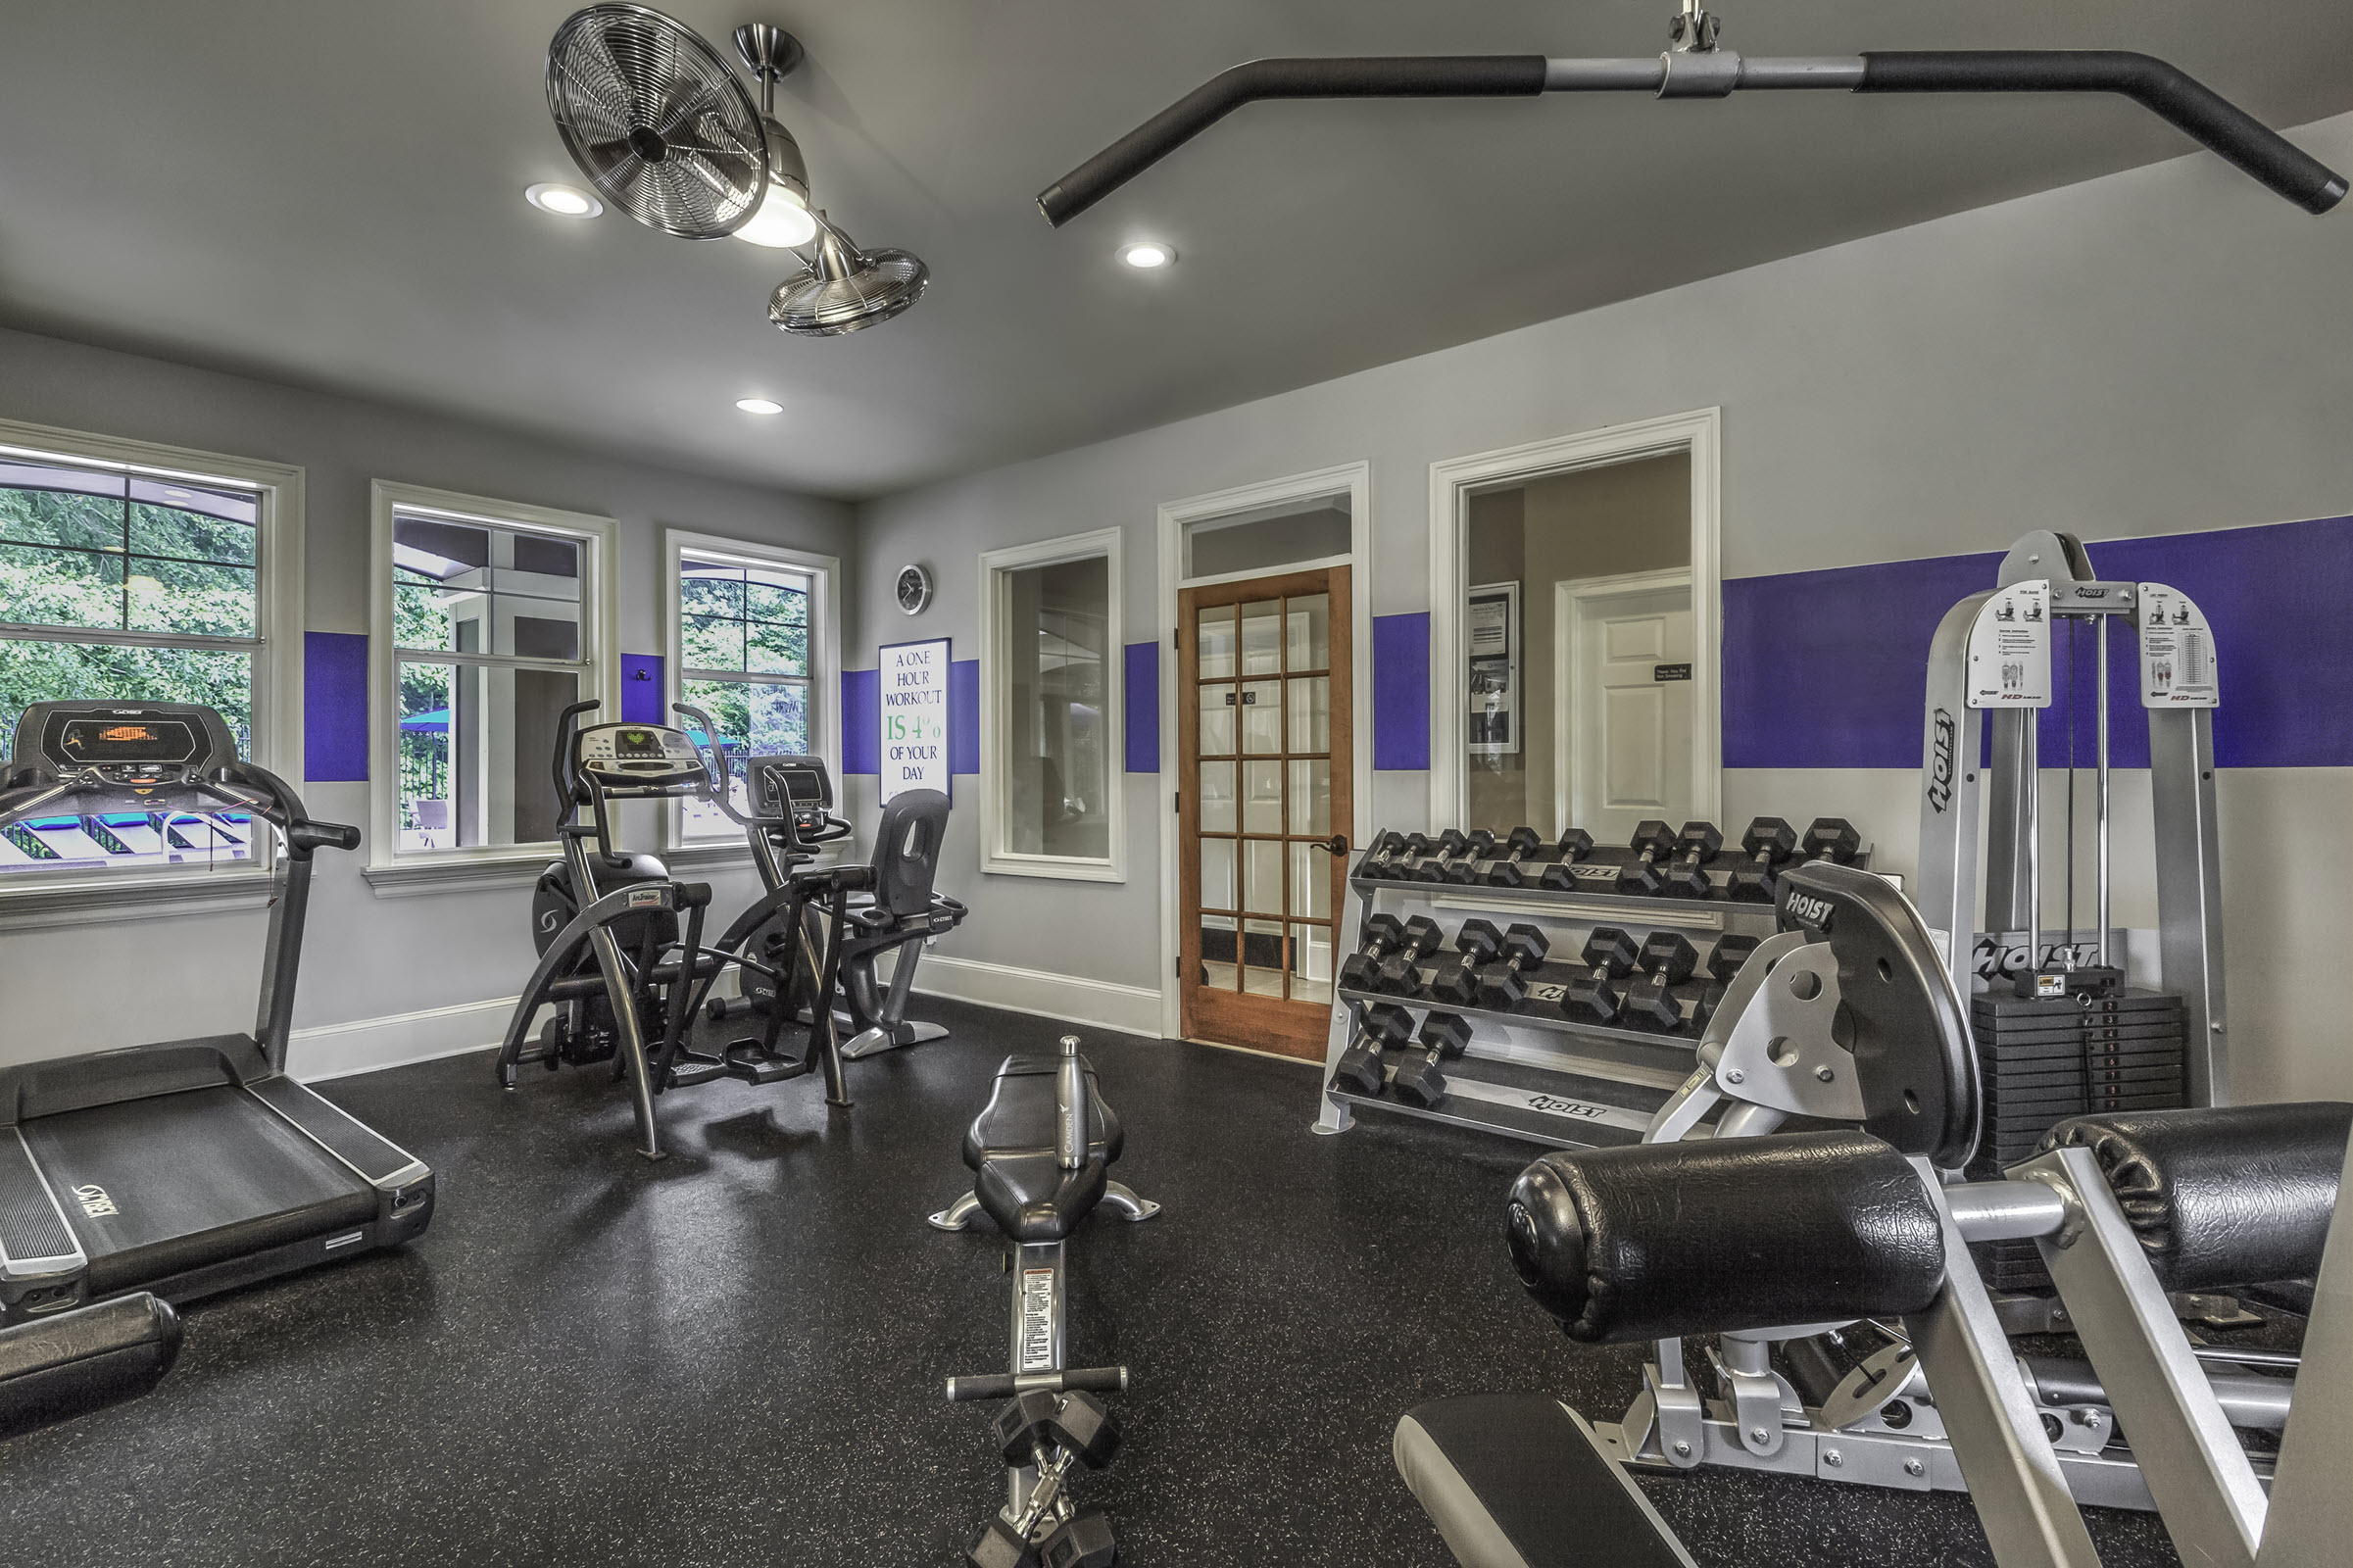 24 hour fitness center with cardio and strength training equipment including free weights Camden Deerfield Apartments Alpharetta (770)872-6592